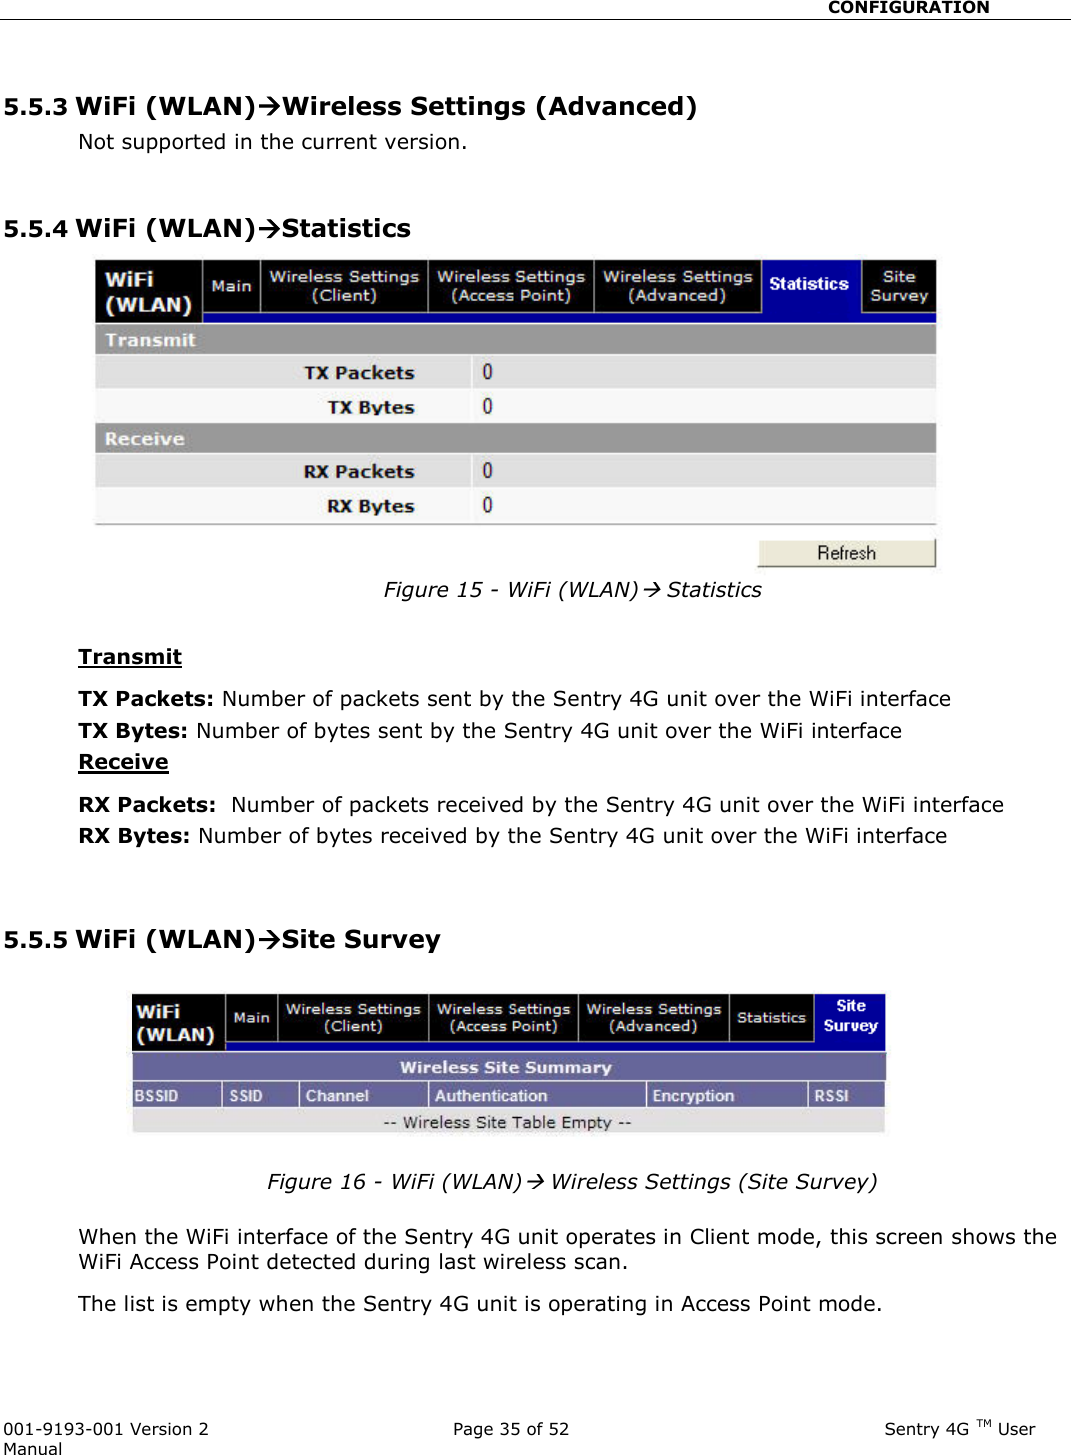                                                       CONFIGURATION  001-9193-001 Version 2              Page 35 of 52                              Sentry 4G TM User Manual  5.5.3 WiFi (WLAN)Wireless Settings (Advanced) Not supported in the current version.   5.5.4 WiFi (WLAN)Statistics Figure 15 - WiFi (WLAN) Statistics  Transmit TX Packets: Number of packets sent by the Sentry 4G unit over the WiFi interface TX Bytes: Number of bytes sent by the Sentry 4G unit over the WiFi interface Receive  RX Packets:  Number of packets received by the Sentry 4G unit over the WiFi interface RX Bytes: Number of bytes received by the Sentry 4G unit over the WiFi interface   5.5.5 WiFi (WLAN)Site Survey  Figure 16 - WiFi (WLAN) Wireless Settings (Site Survey)  When the WiFi interface of the Sentry 4G unit operates in Client mode, this screen shows the WiFi Access Point detected during last wireless scan.  The list is empty when the Sentry 4G unit is operating in Access Point mode.  